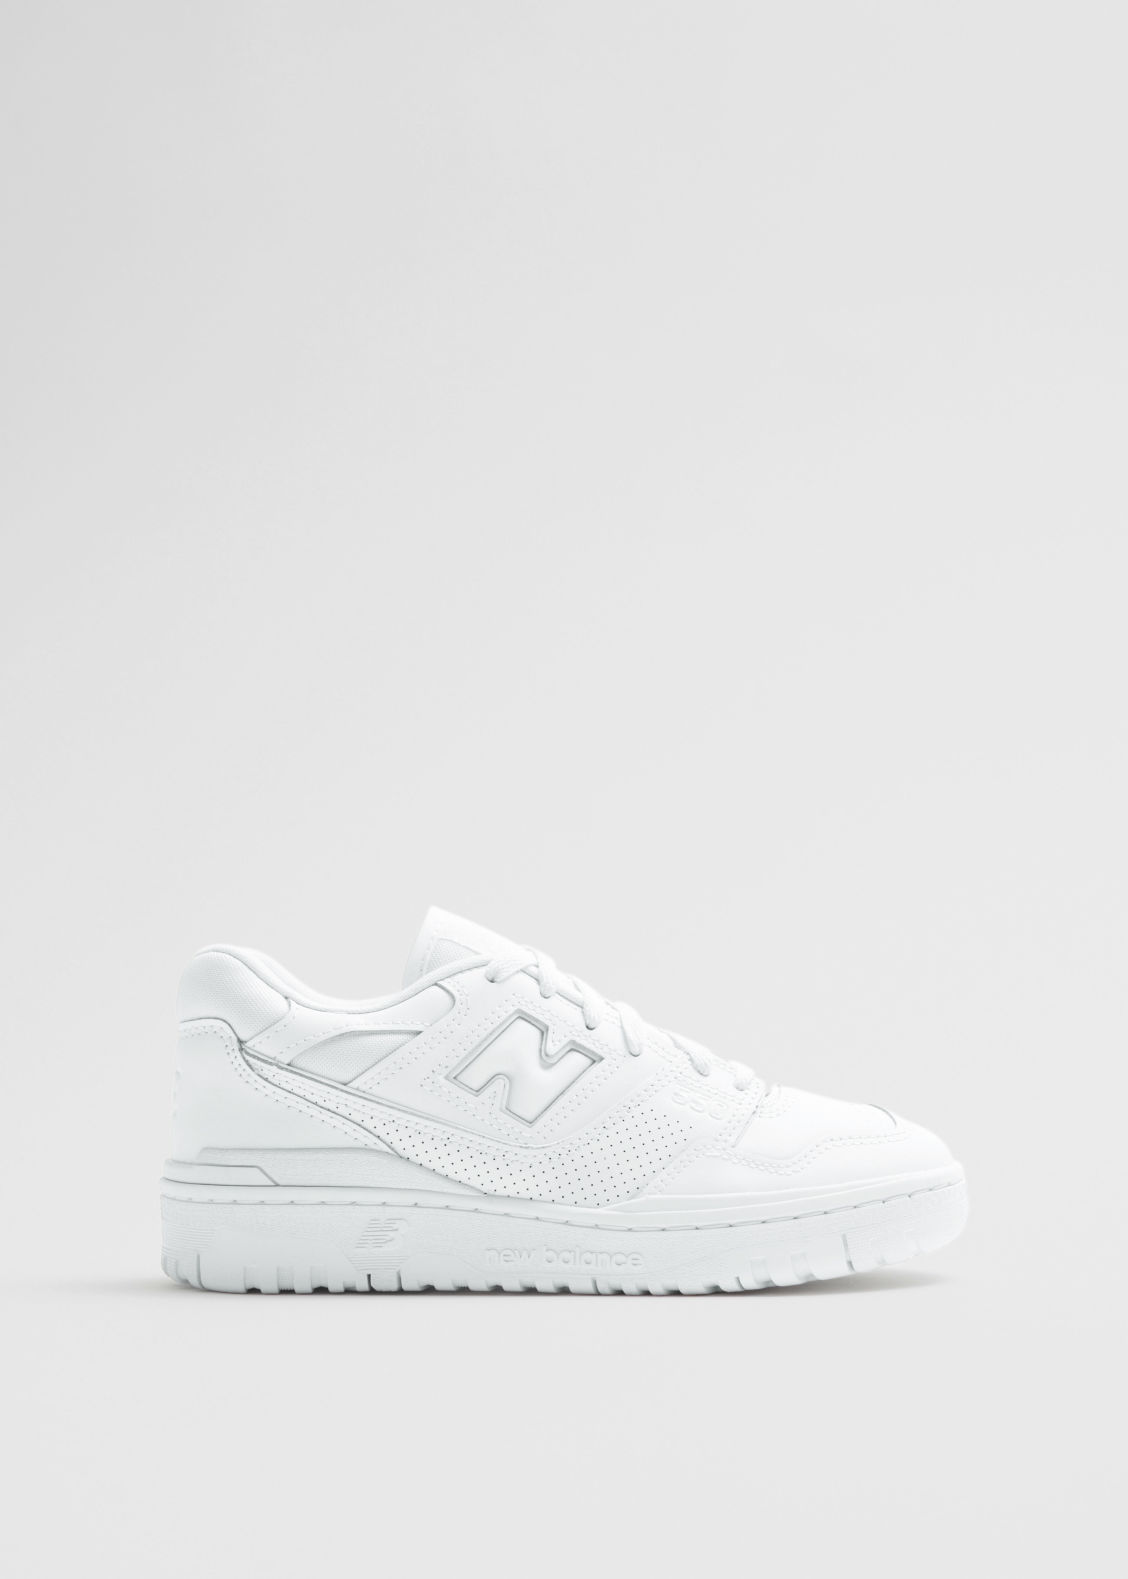 Contemporary Stability + 550c Trainers